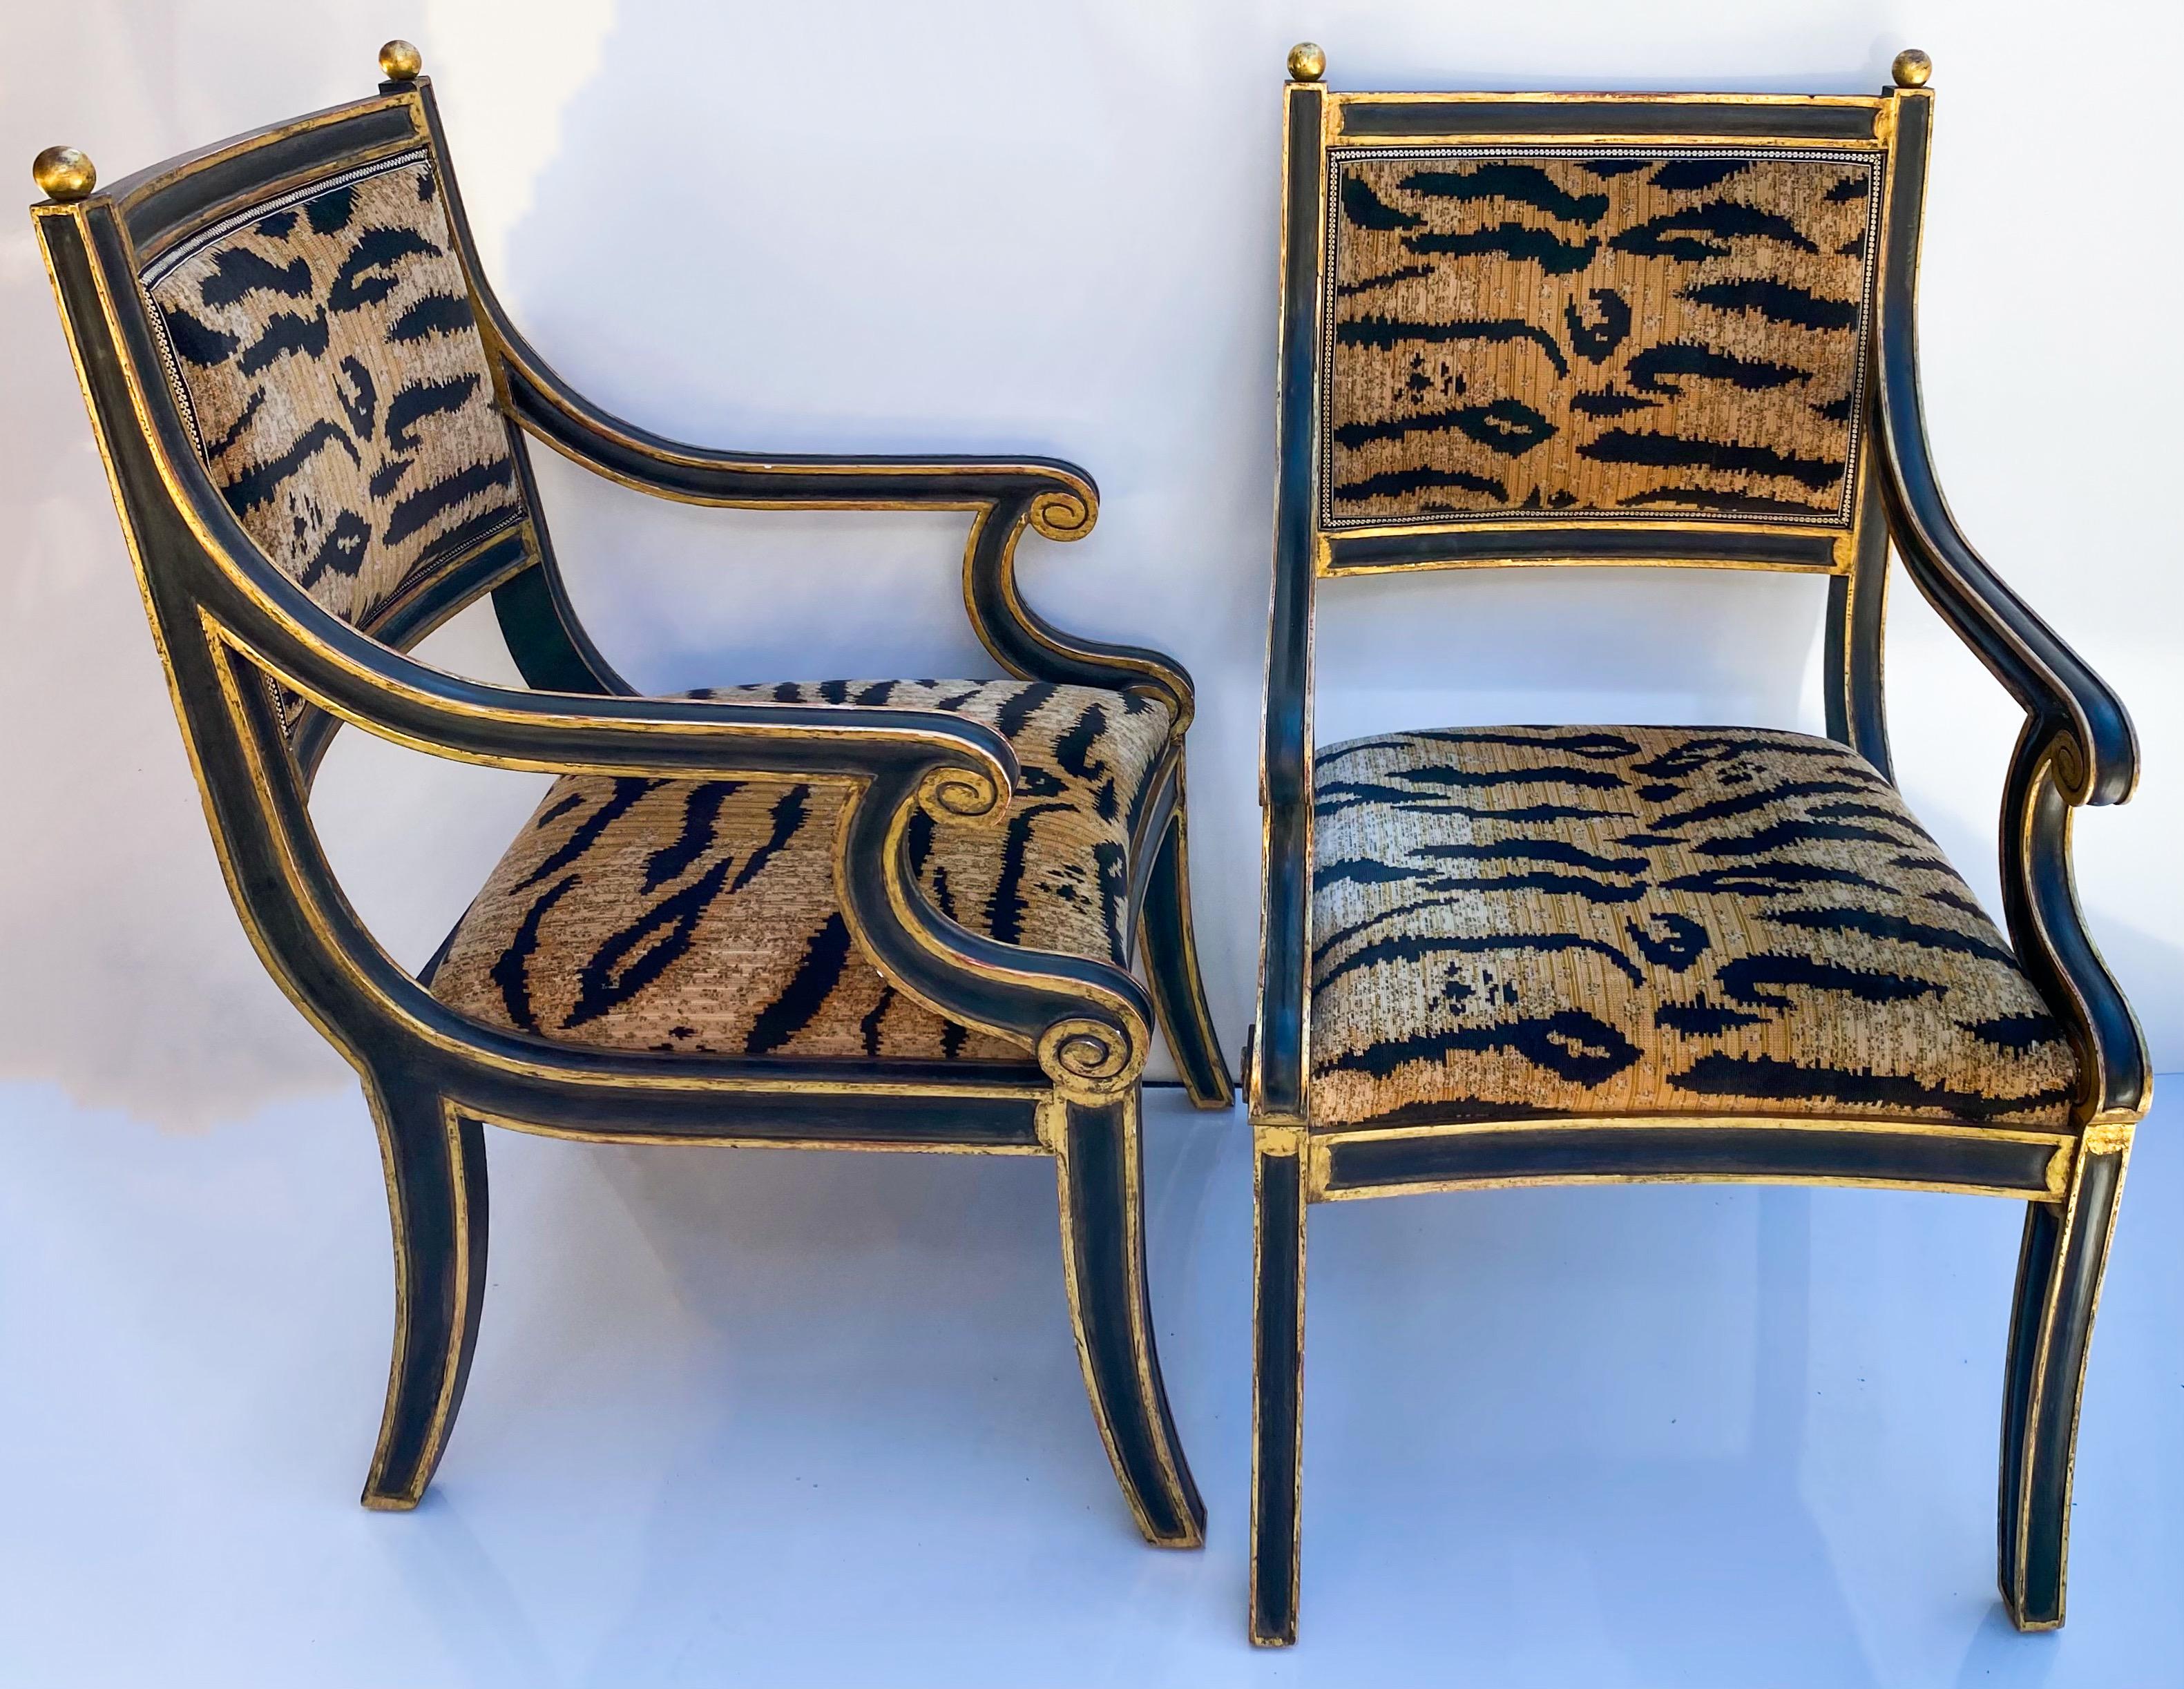 This is a pair of late 20th century pair of neoclassical style chairs upholstered in a tiger velvet. They have giltwood and ebony frames. They were designed by Jerry Pair for Formations. They are marked and in excellent condition.